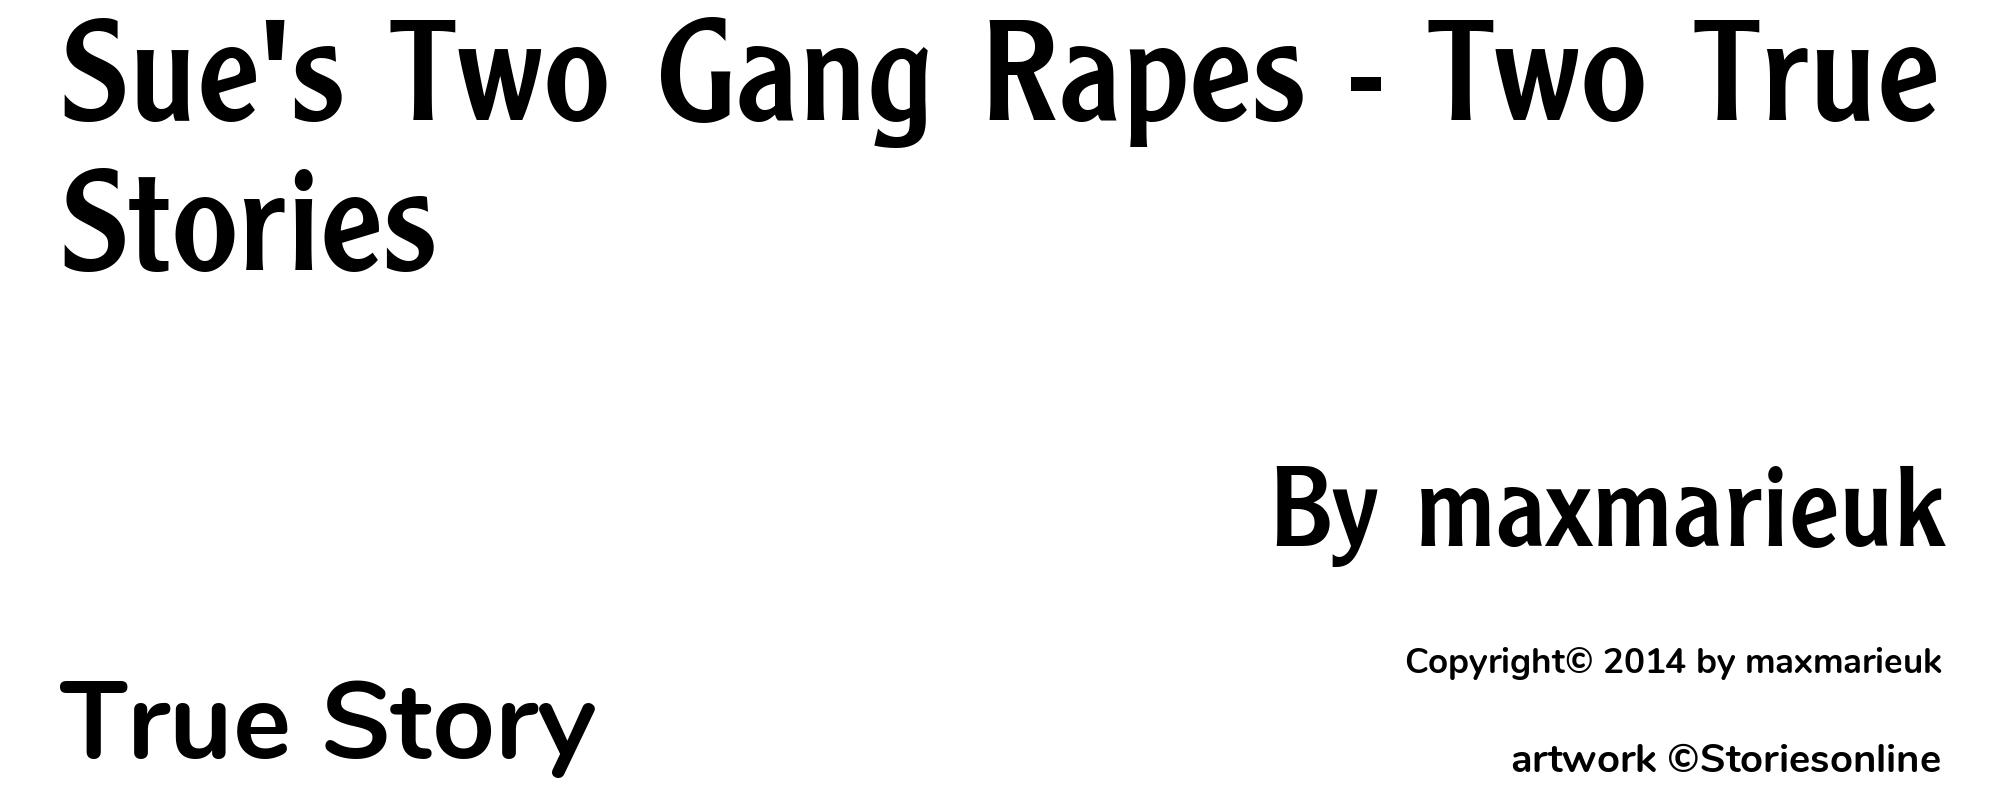 Sue's Two Gang Rapes - Two True Stories - Cover